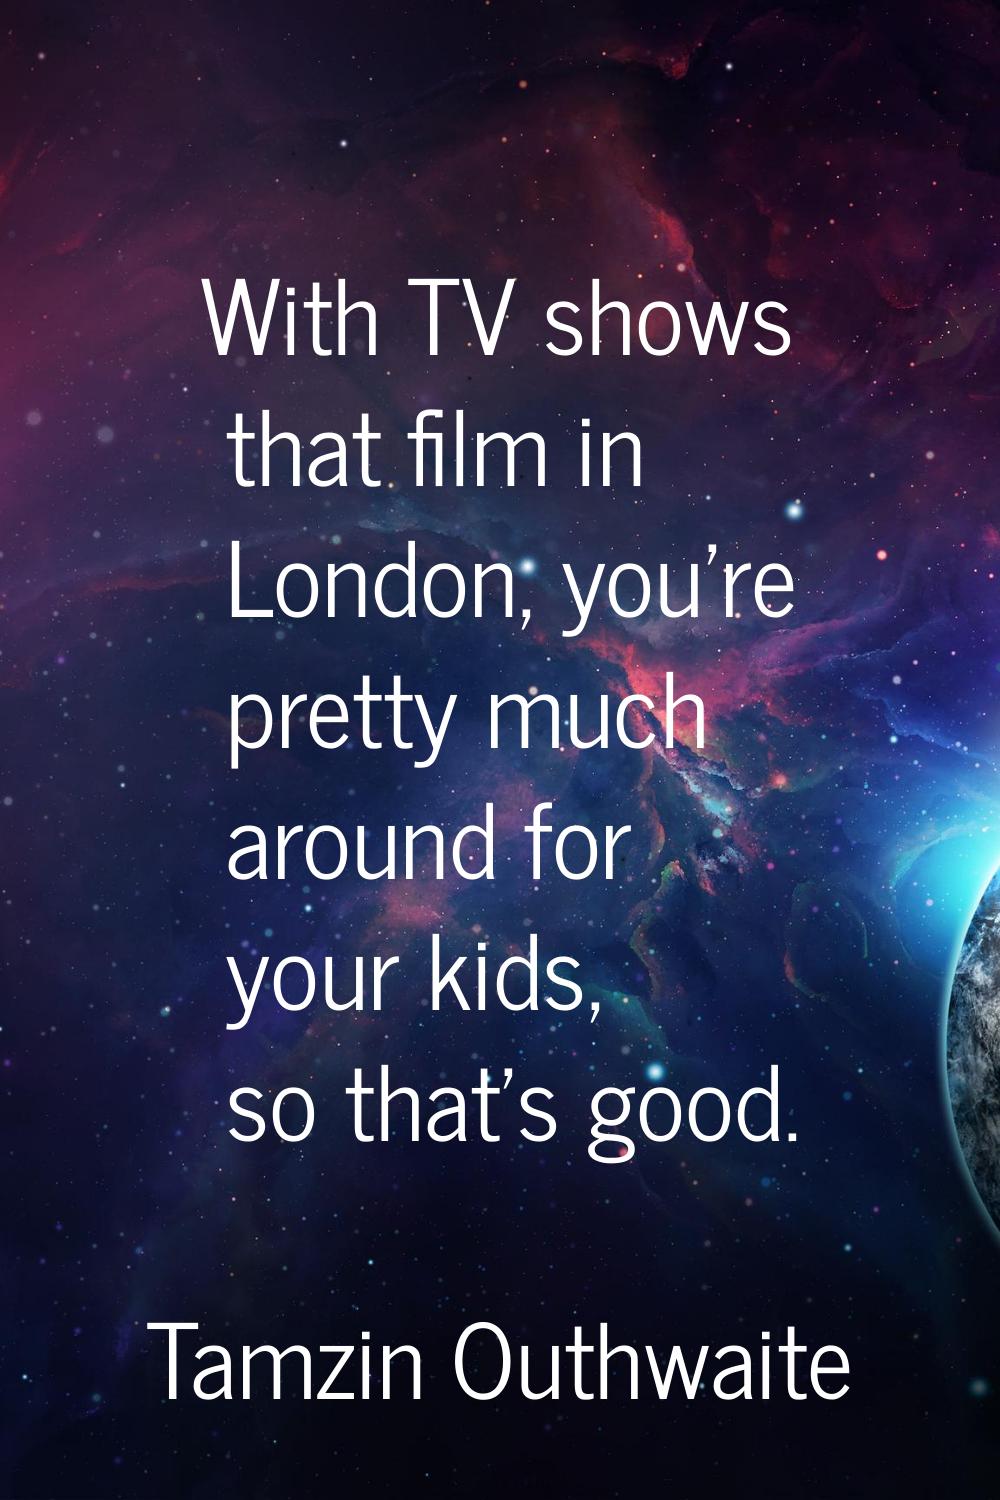 With TV shows that film in London, you're pretty much around for your kids, so that's good.